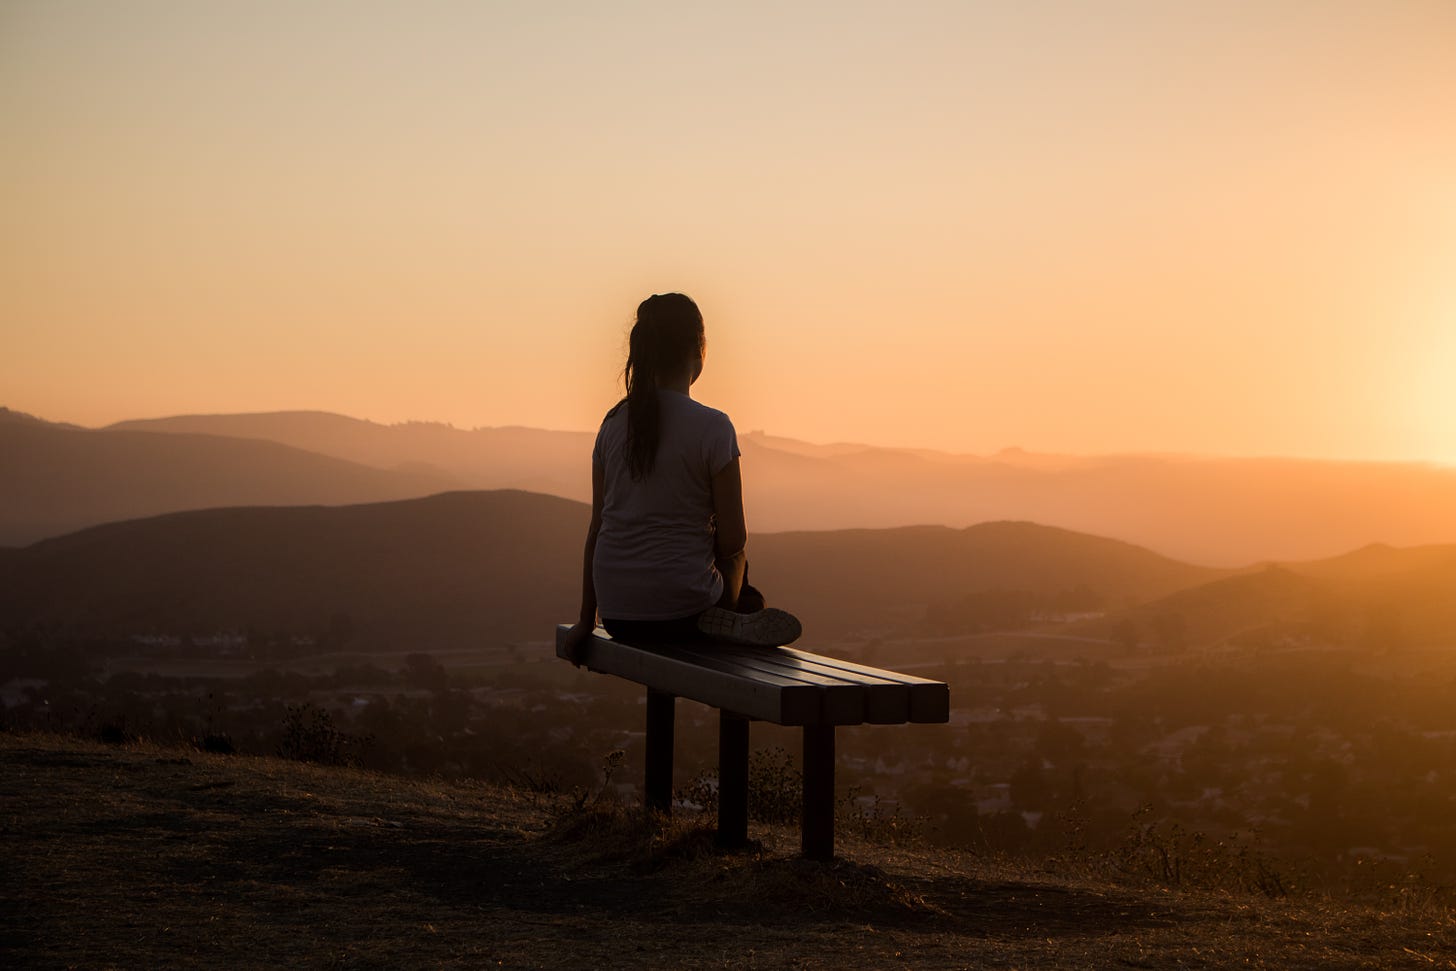 Silhouette of woman from behind, sitting on a bench watching a sunset from a hilltop